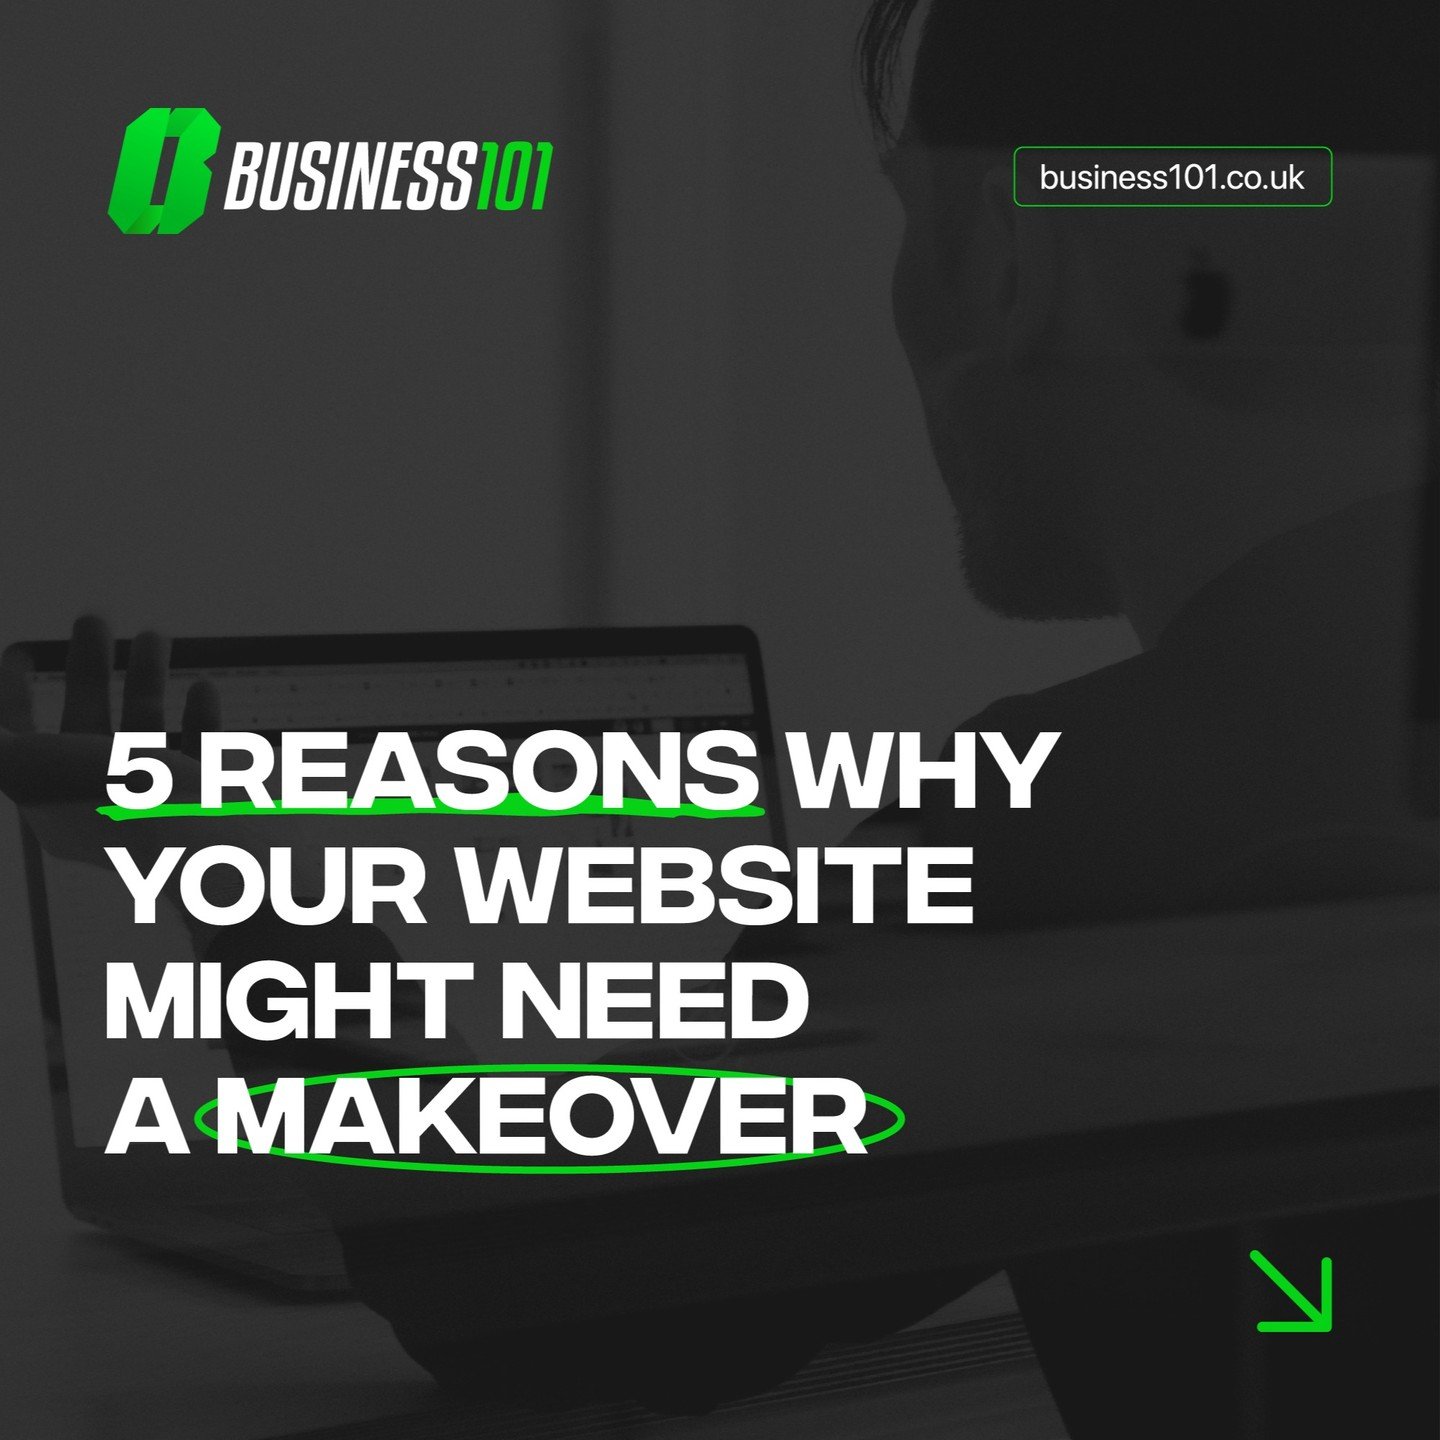 Is your website feeling a bit stale? 😴

Check out these 5 reasons why your website might need a makeover! 🎨

Want personalised advice? Reach out to me at alex@business101.co.uk or visit our website (link in bio) today! 🙌